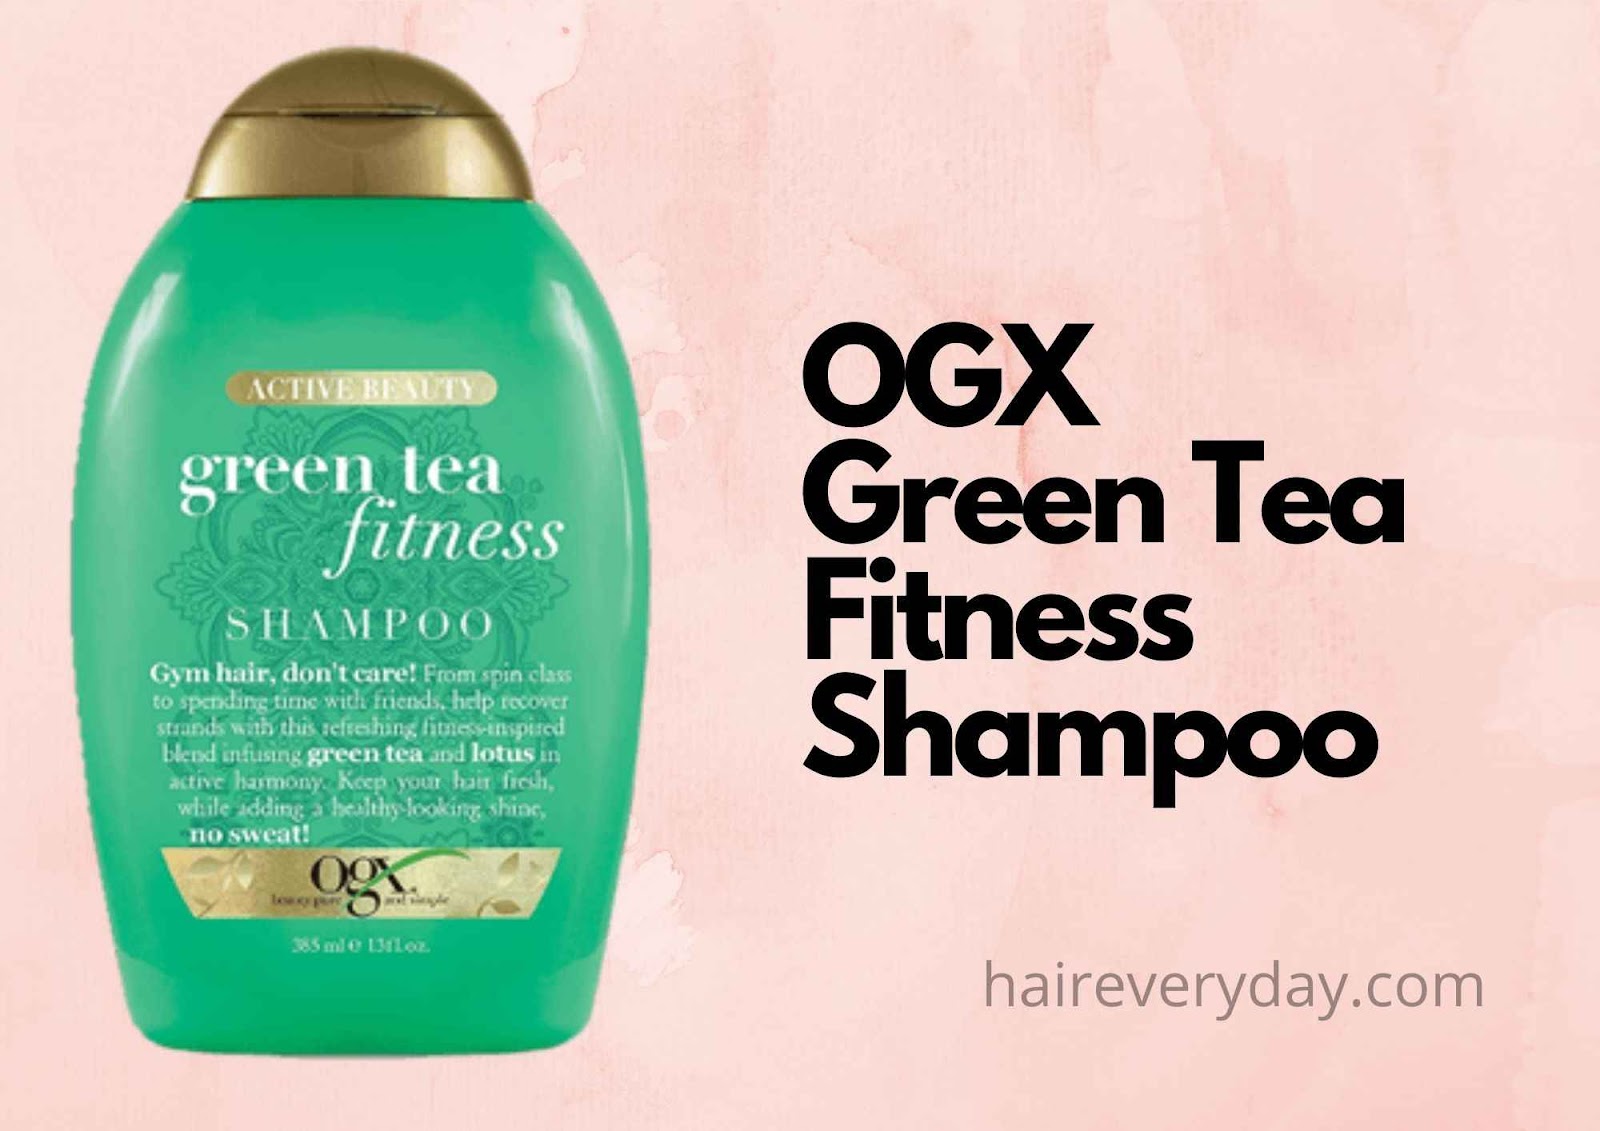 12 Best OGX Shampoo: Reviews & Guide 2022 - Hair Everyday Review